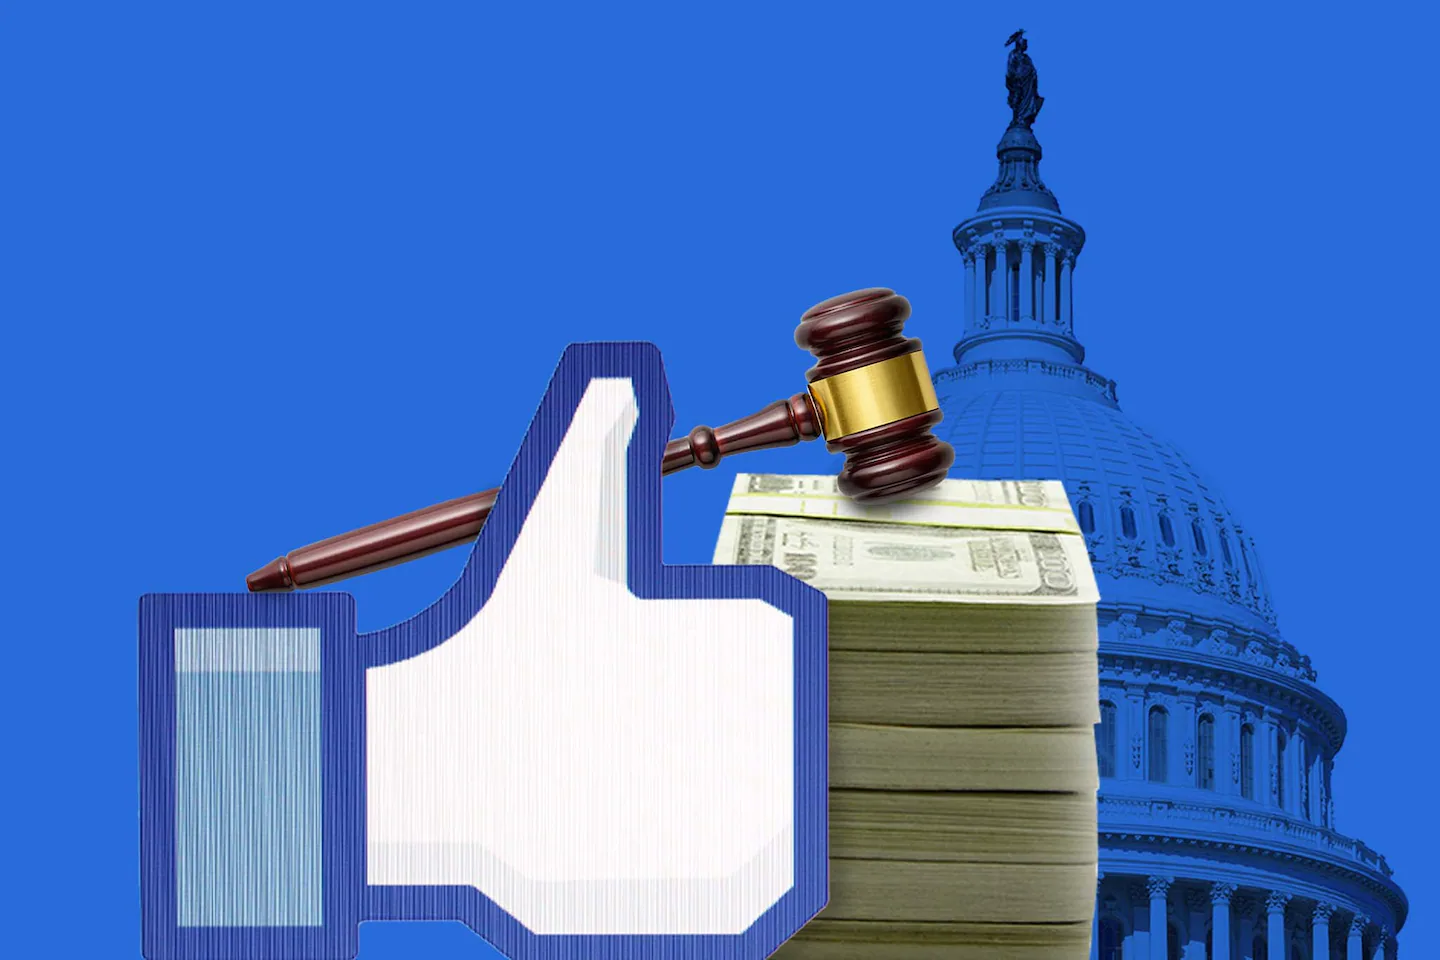 Facebook-funded American Edge waged a war against regulation